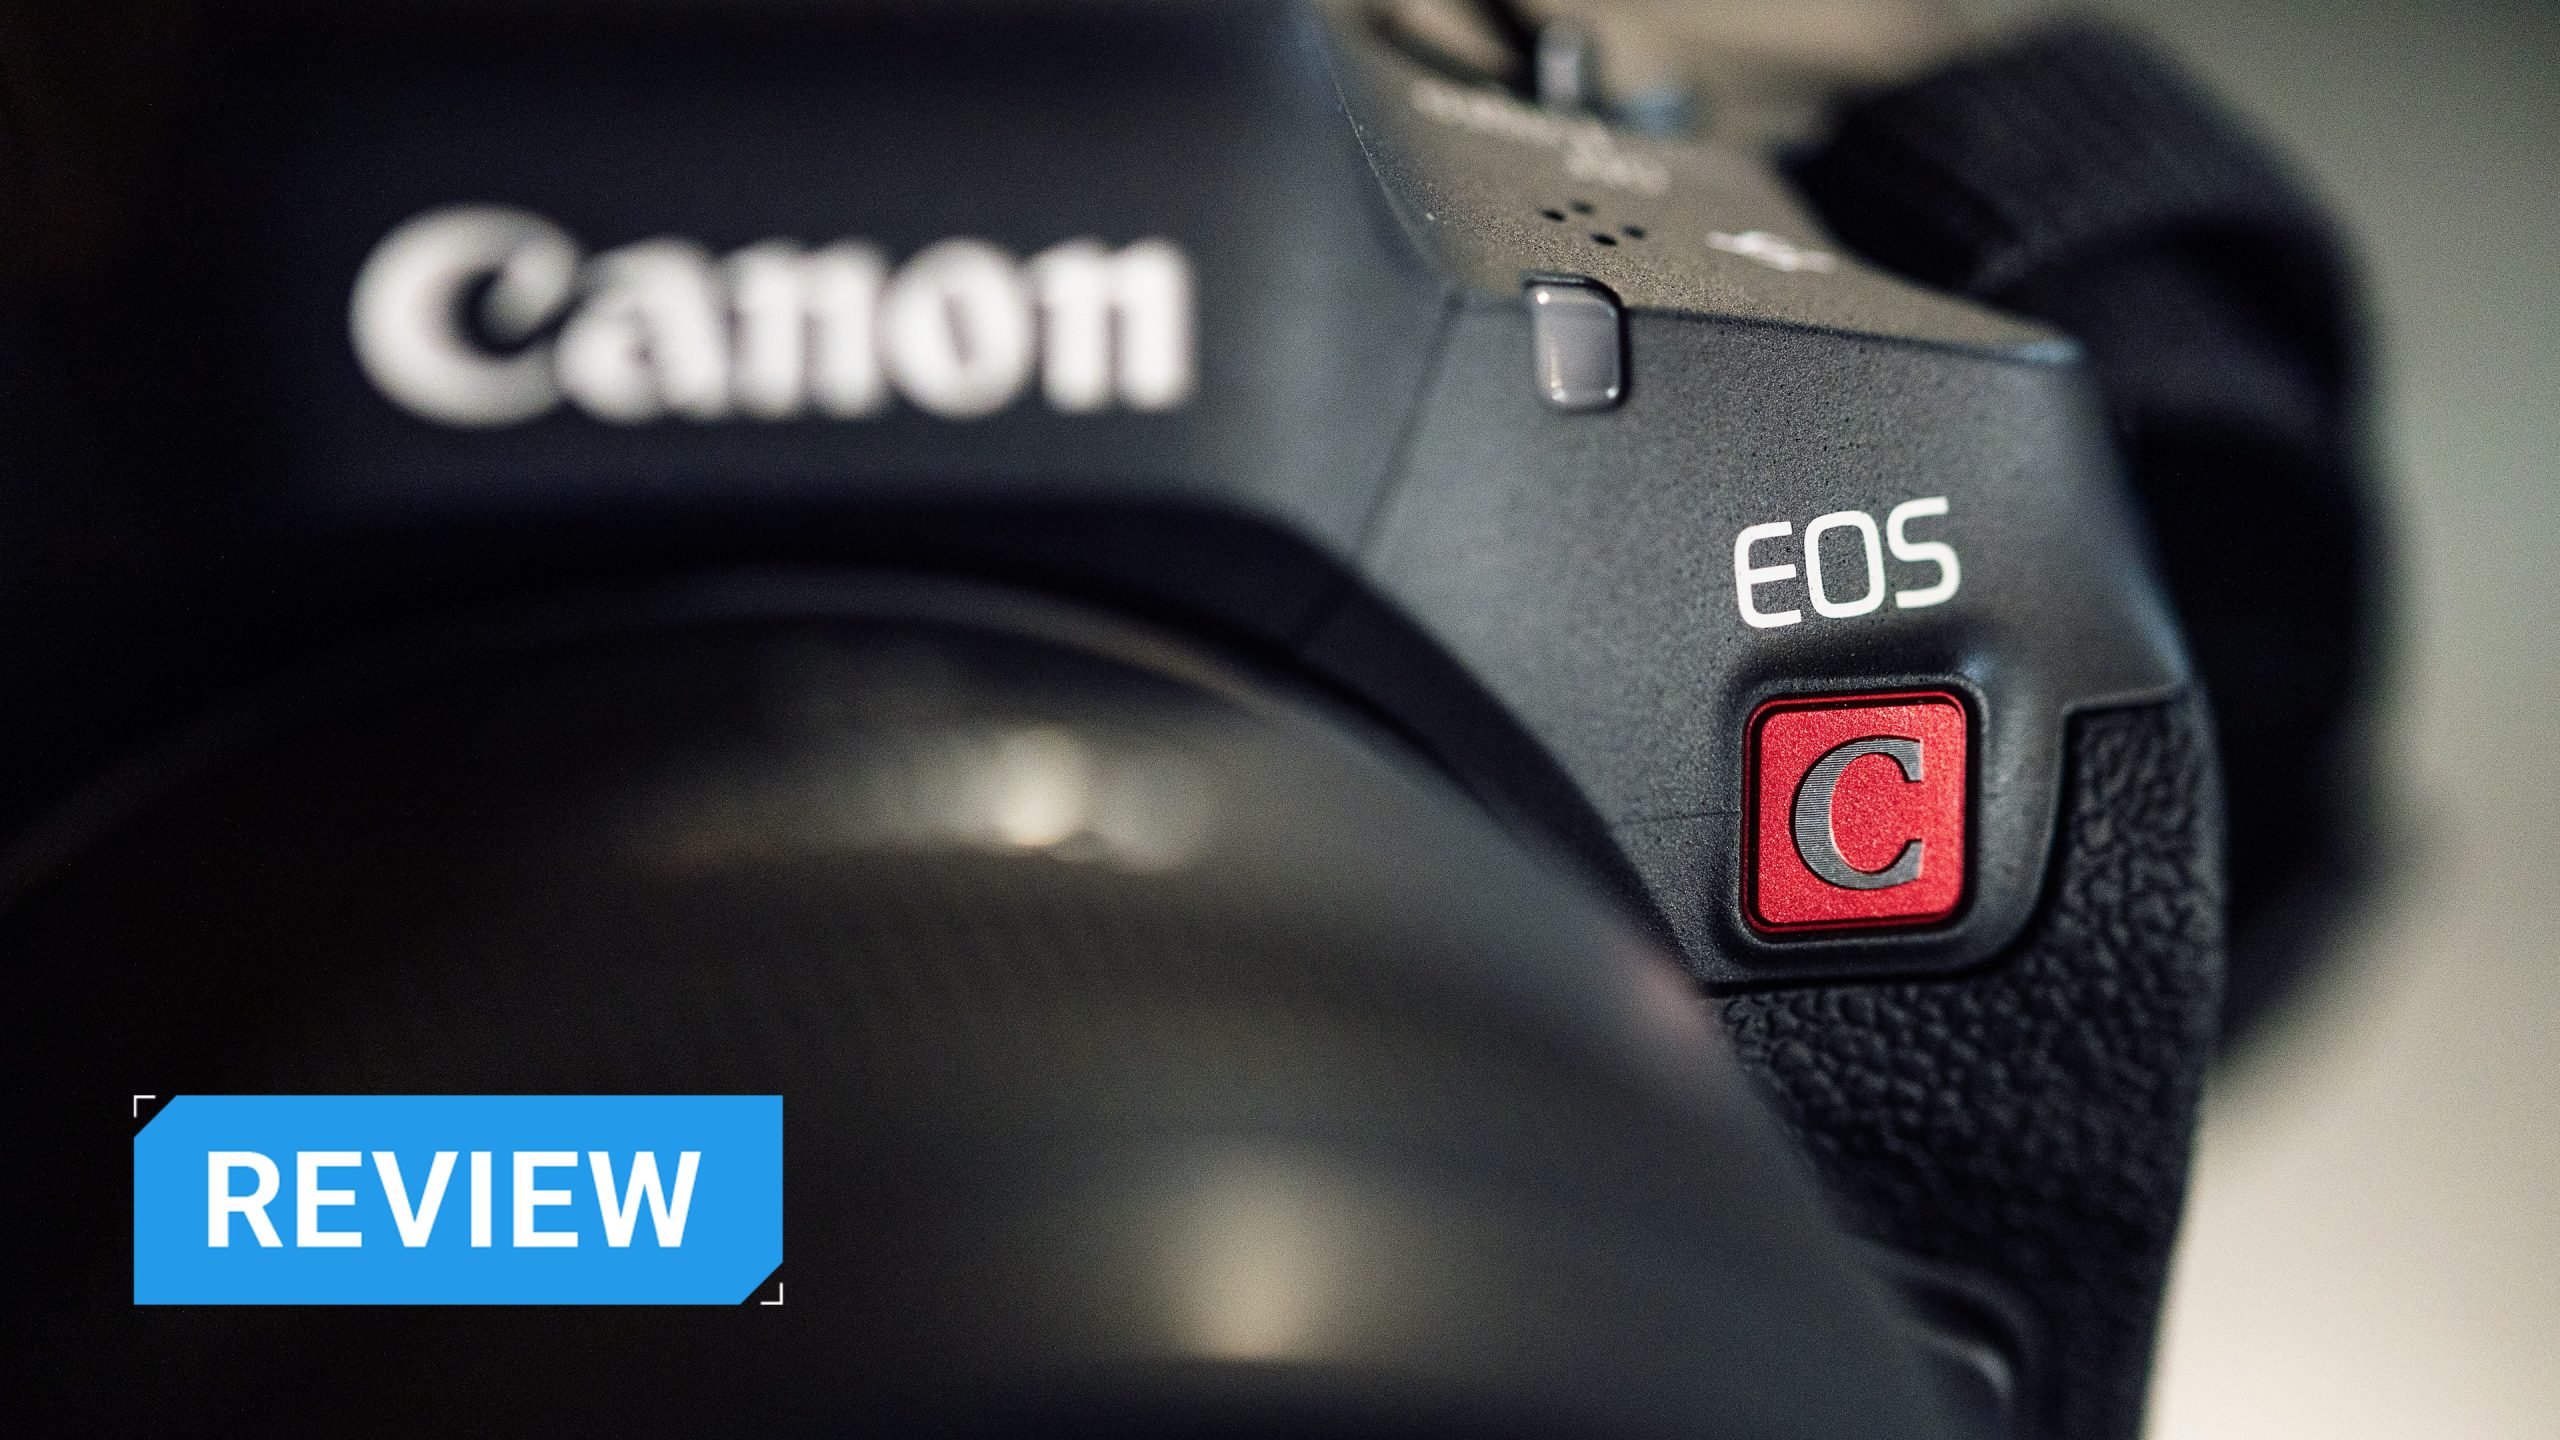 Canon EOS R5c Review: two brilliant cameras in one body